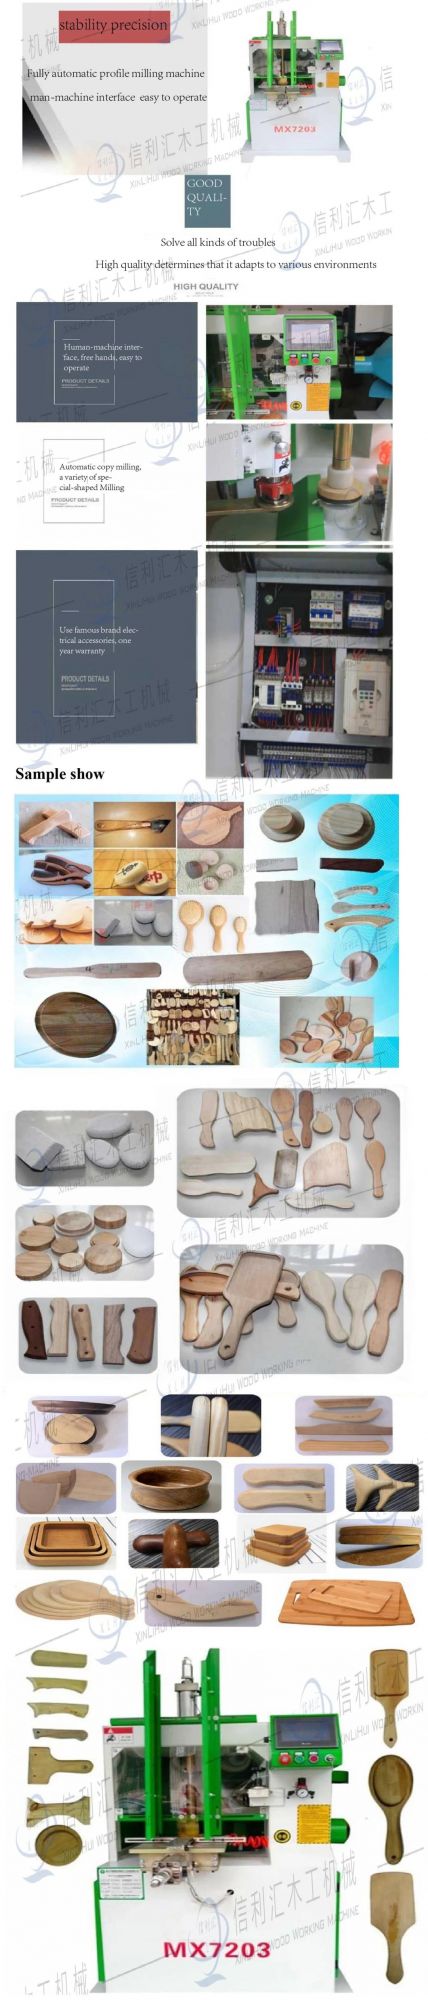 a Bamboo and Wood Processing Plant for Cups, Saucers, Spoon Fork and Decorative Items Making Machine etc., Wood Pellet Mill Bamboo Processing Machinery